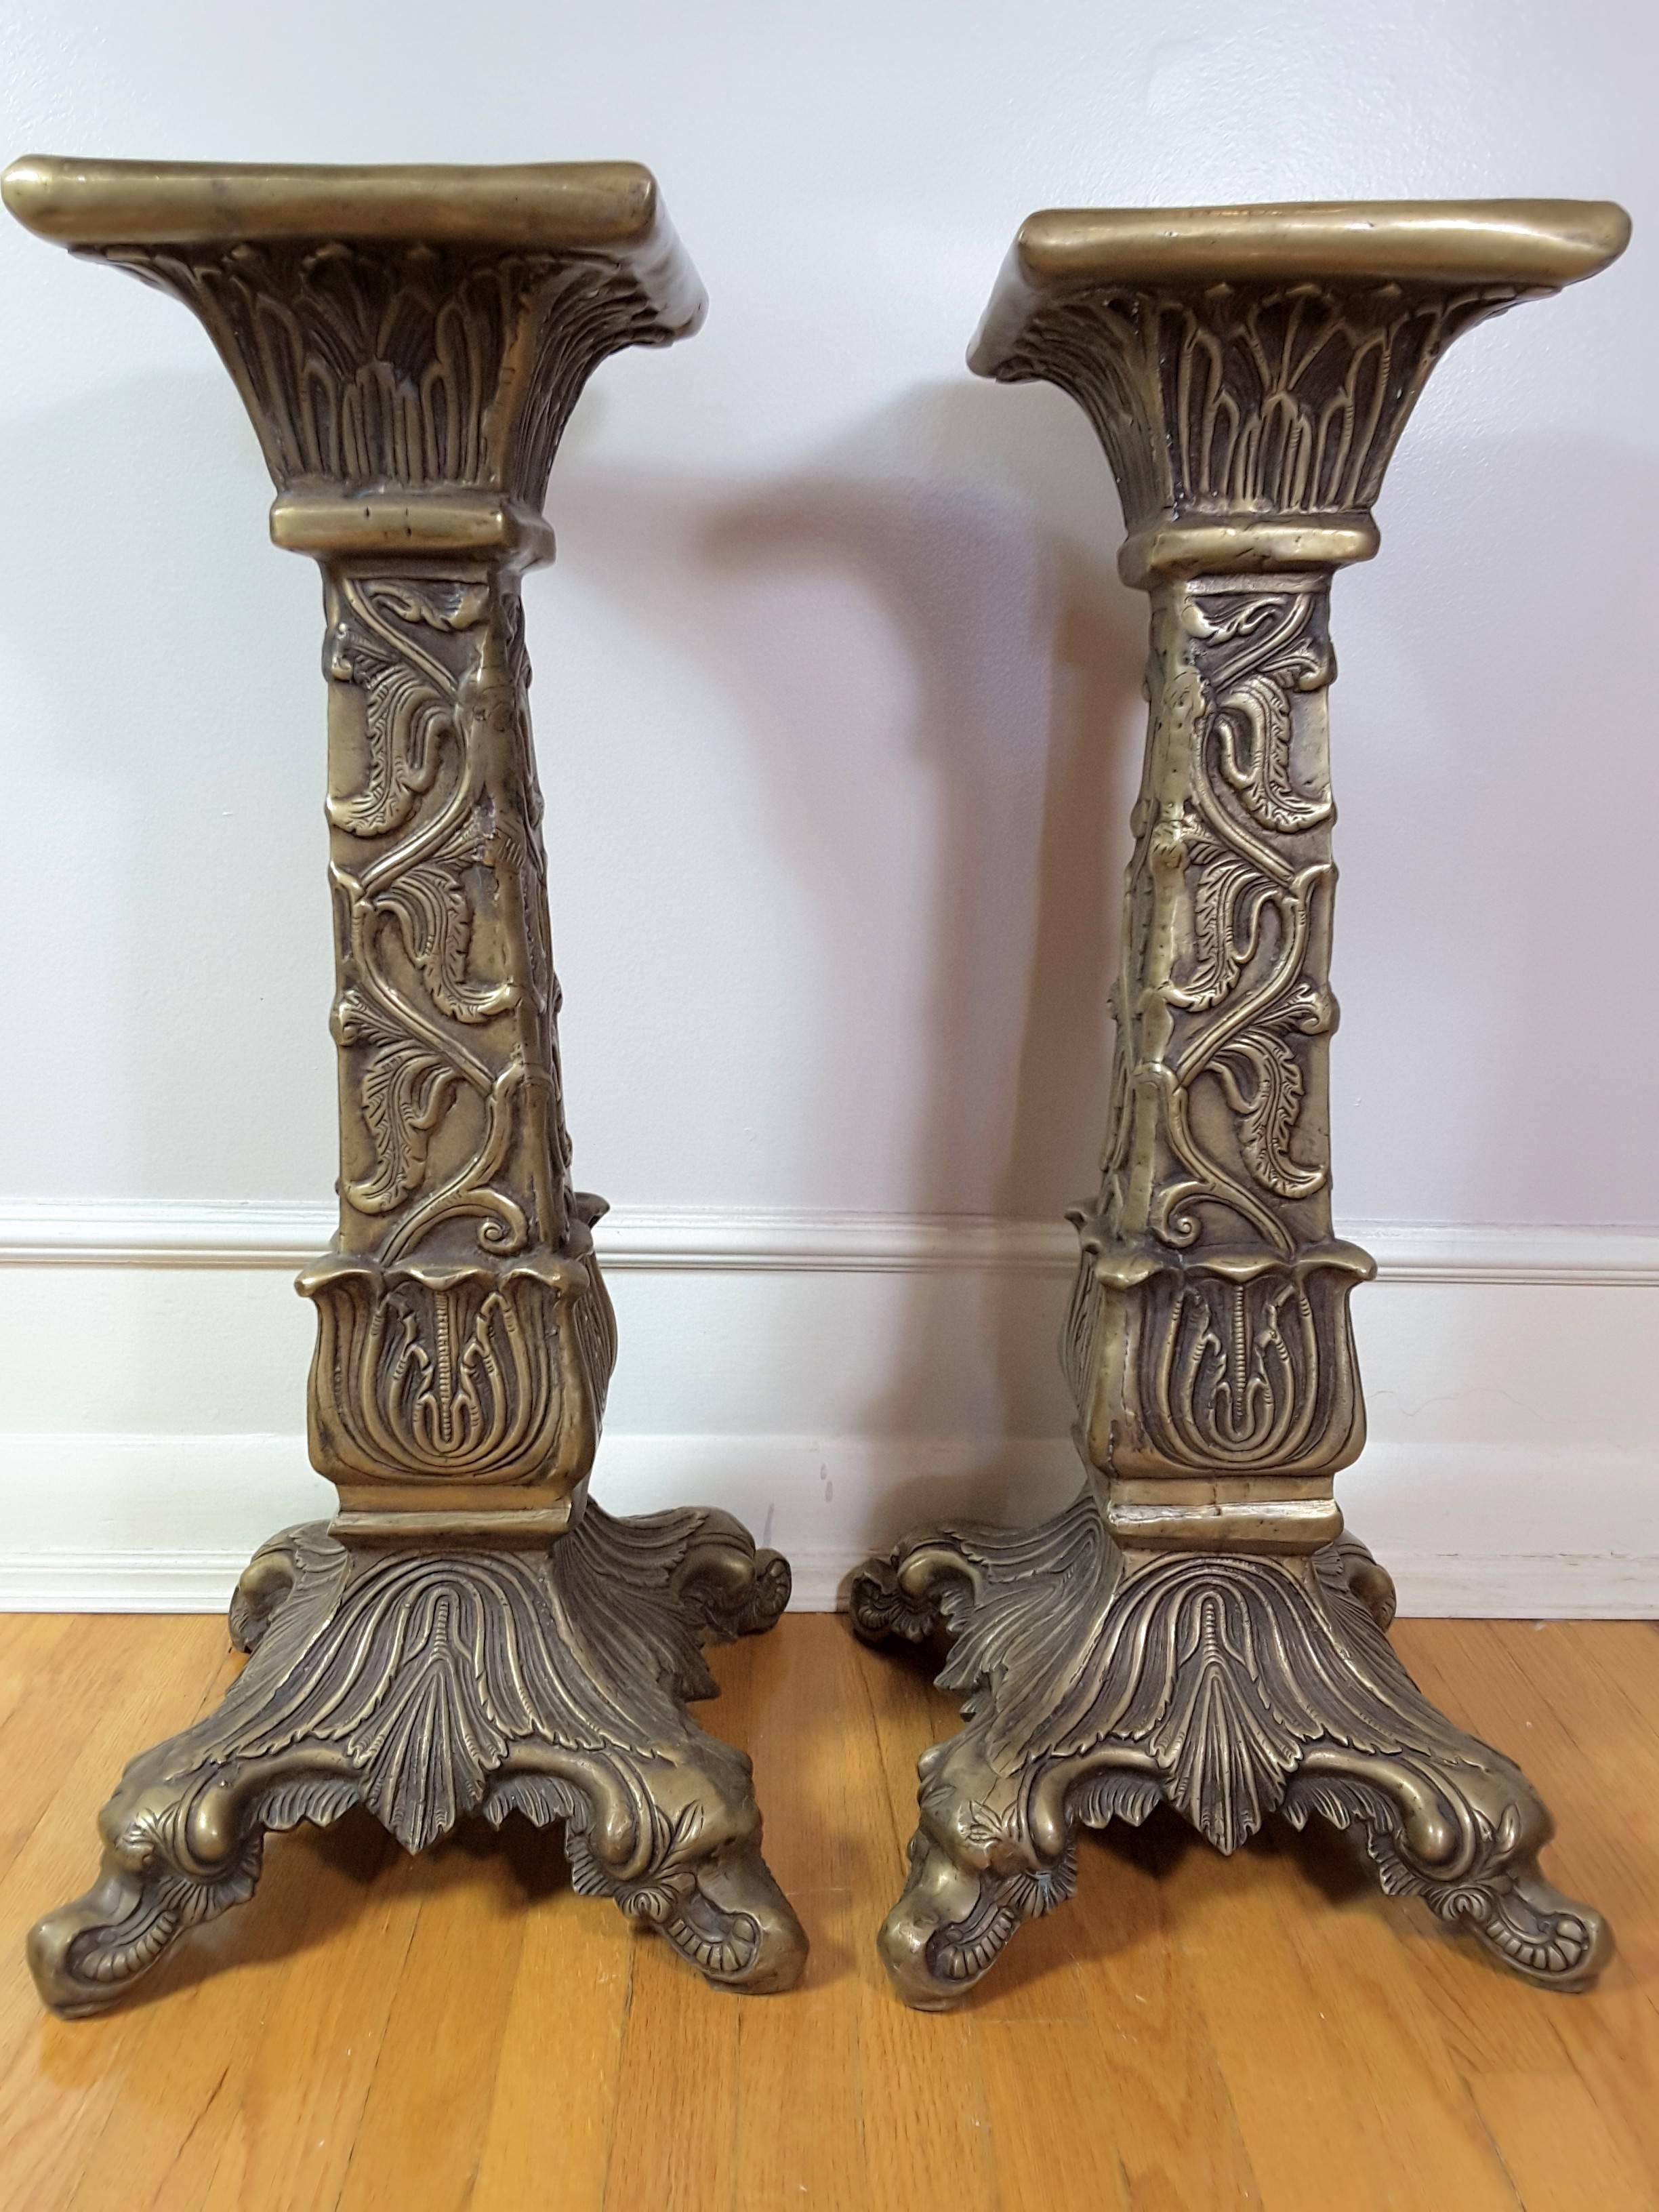 Pair of Mid-Century Modern solid brass patinated pedestals, The pedastals are done in a leaf and vine pattern on the columns, Raised scroll feet, Flaired to a square flat top. The pedastals are from the mid-1960s-1970. The stands measure 26